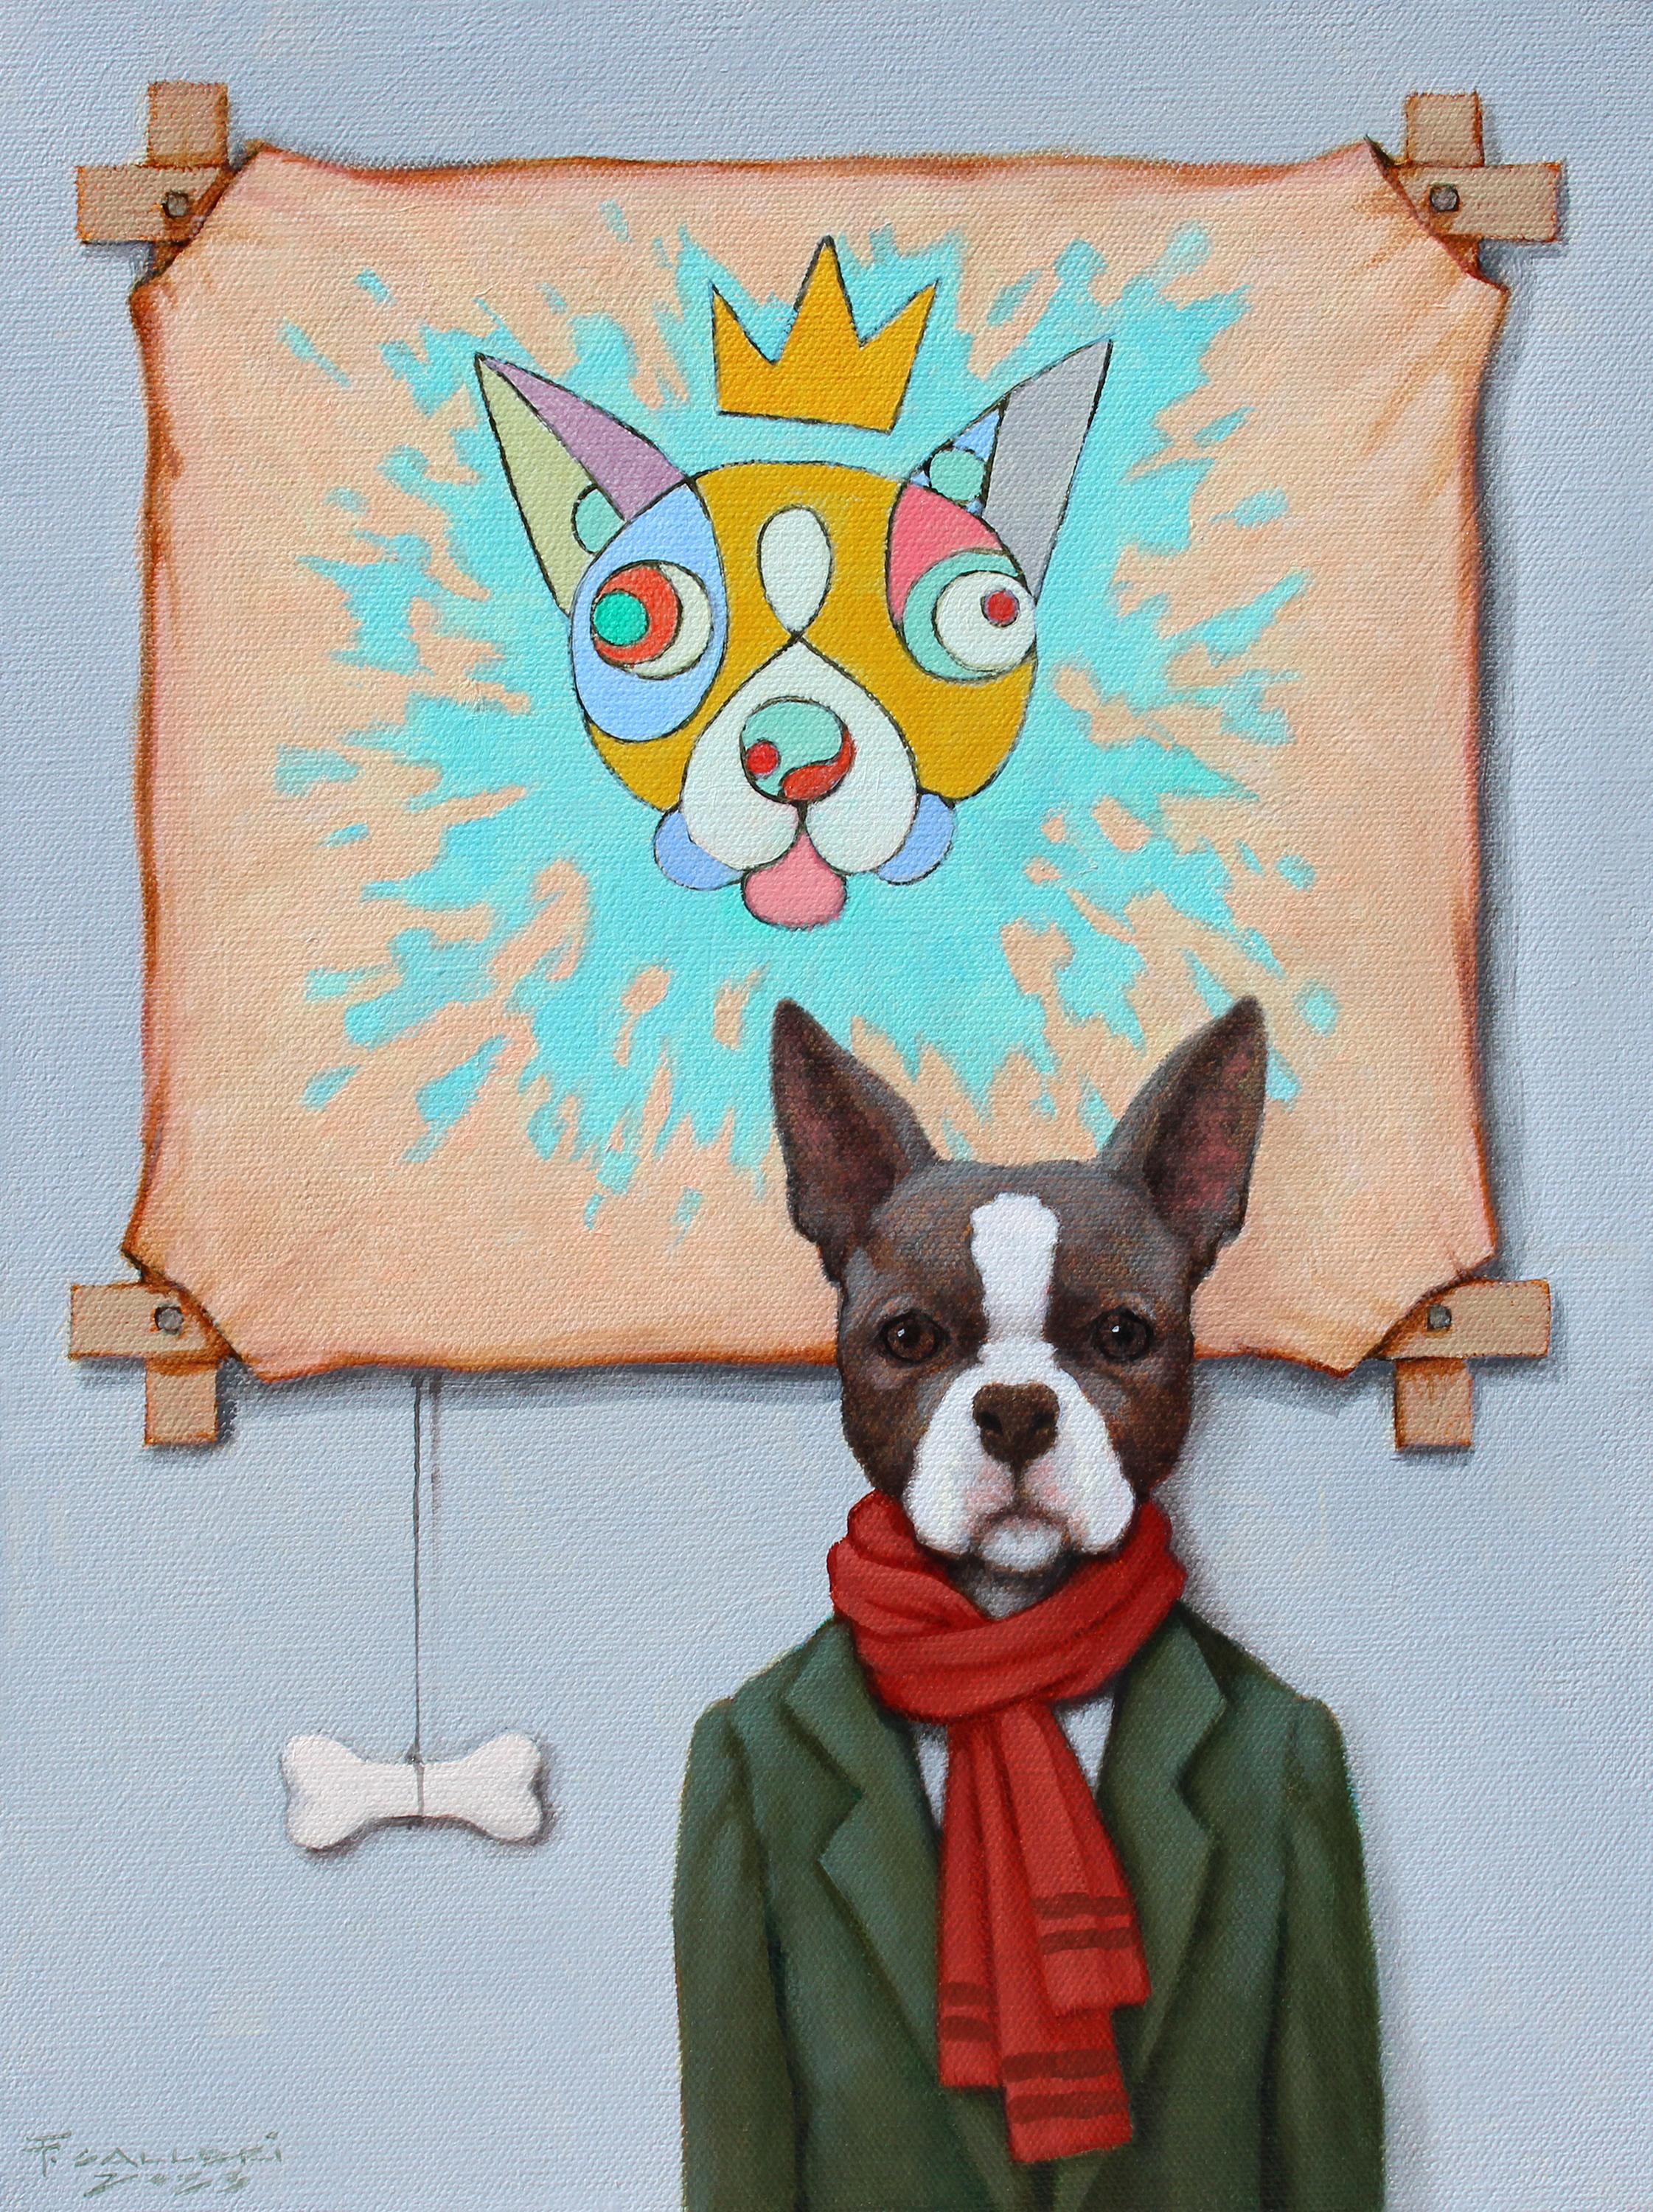 "At the MOMA, Self Portrait" Whimsical oil painting of a dog next to a portrait - Painting by Fred Calleri